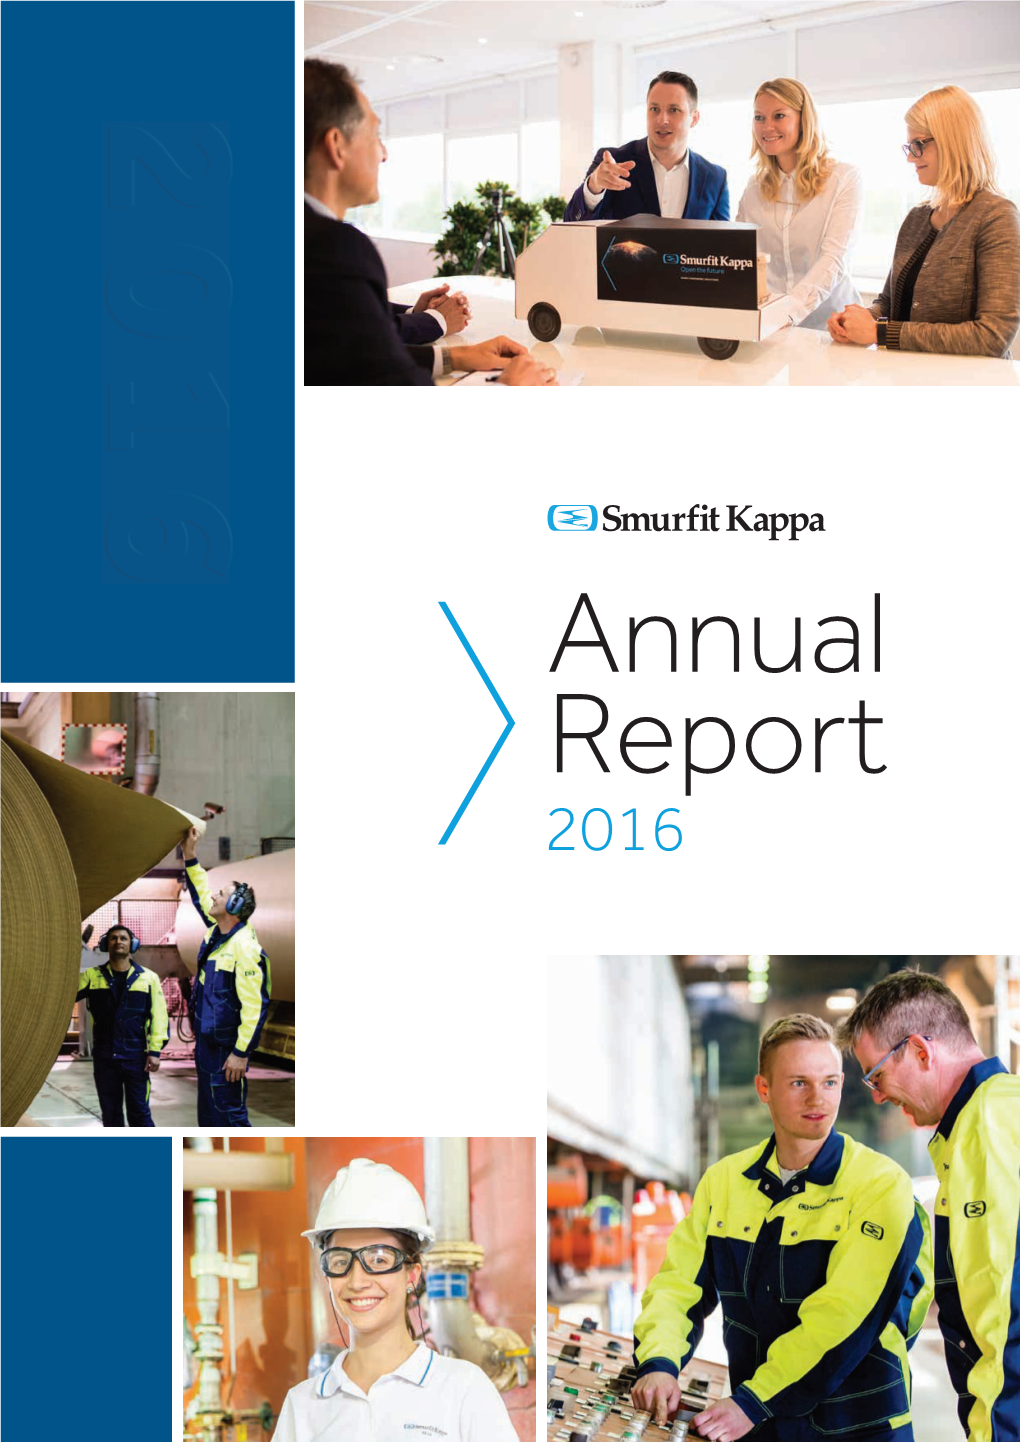 Smurfit Kappa Annual Report 2016 Overview Overview